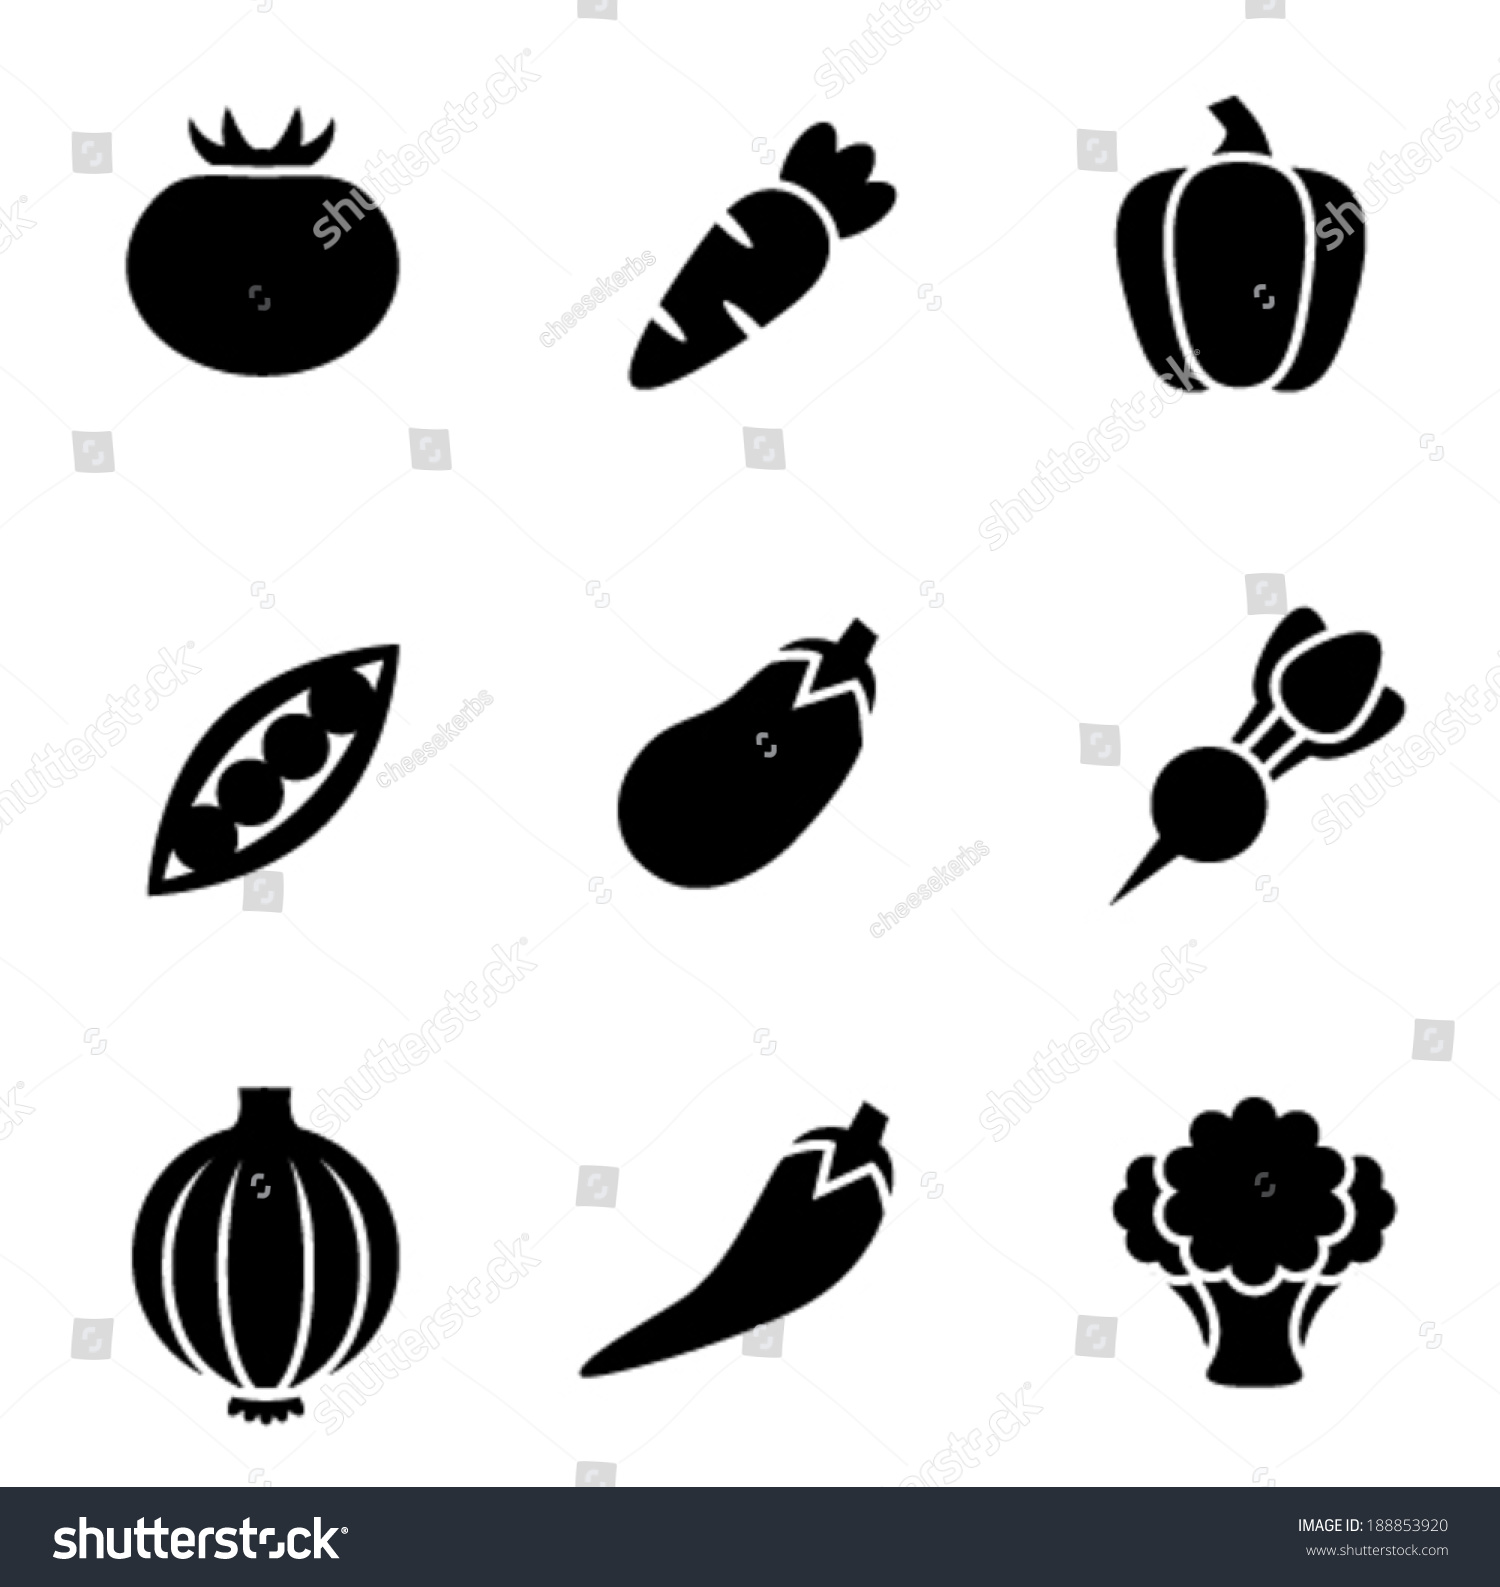 Simple Black White Vector Vegetable Icons Stock Vector 188853920 ...